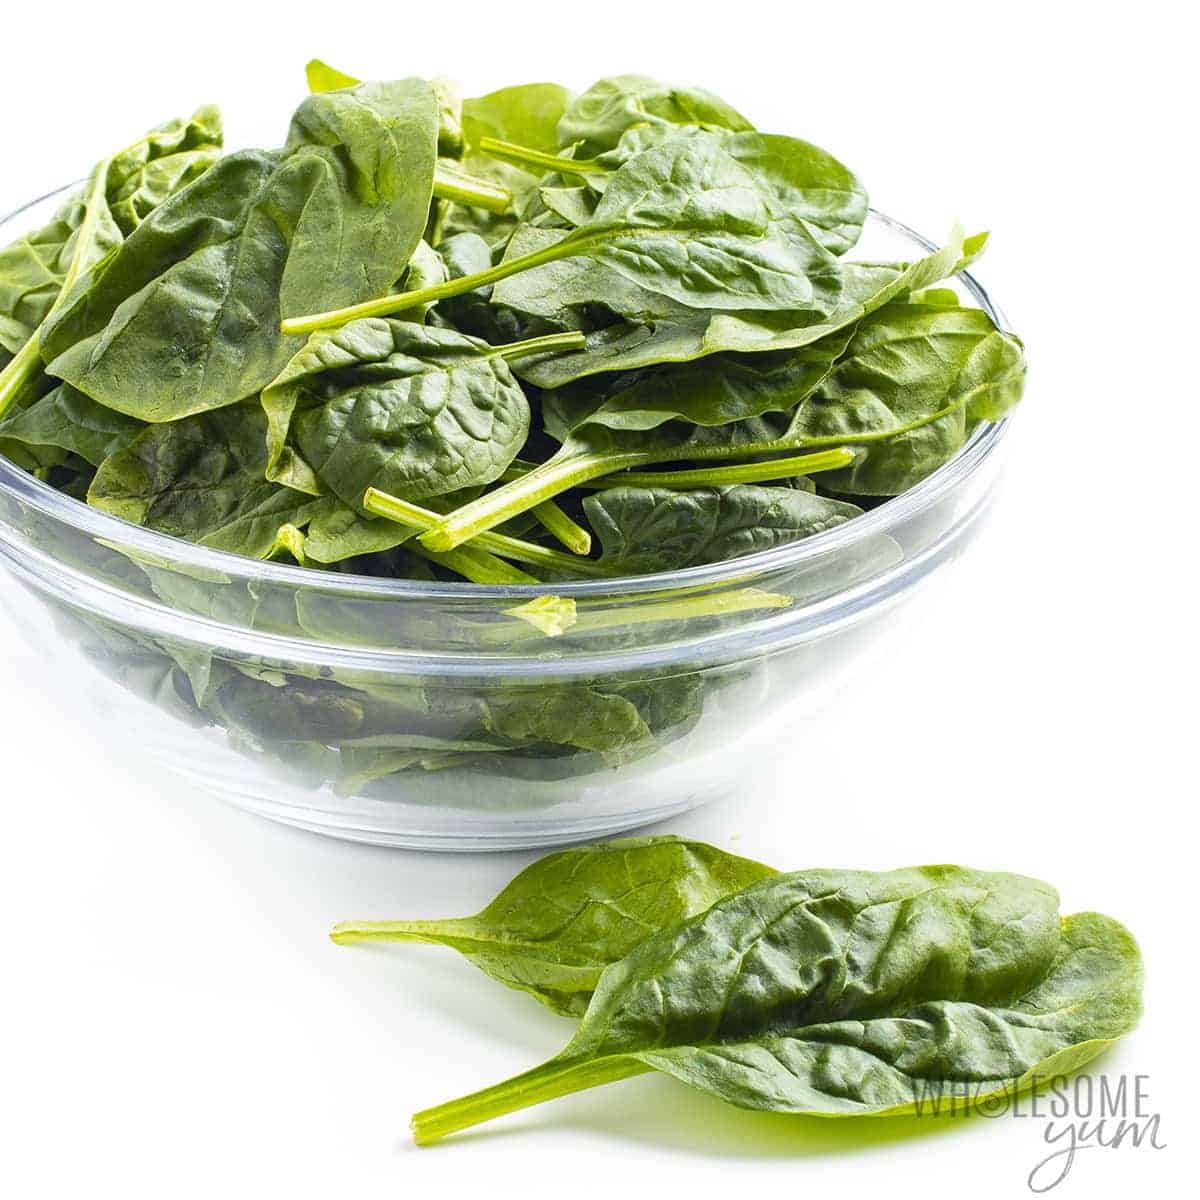 Are carbs in spinach high? This bowl of fresh spinach is low in carbs.